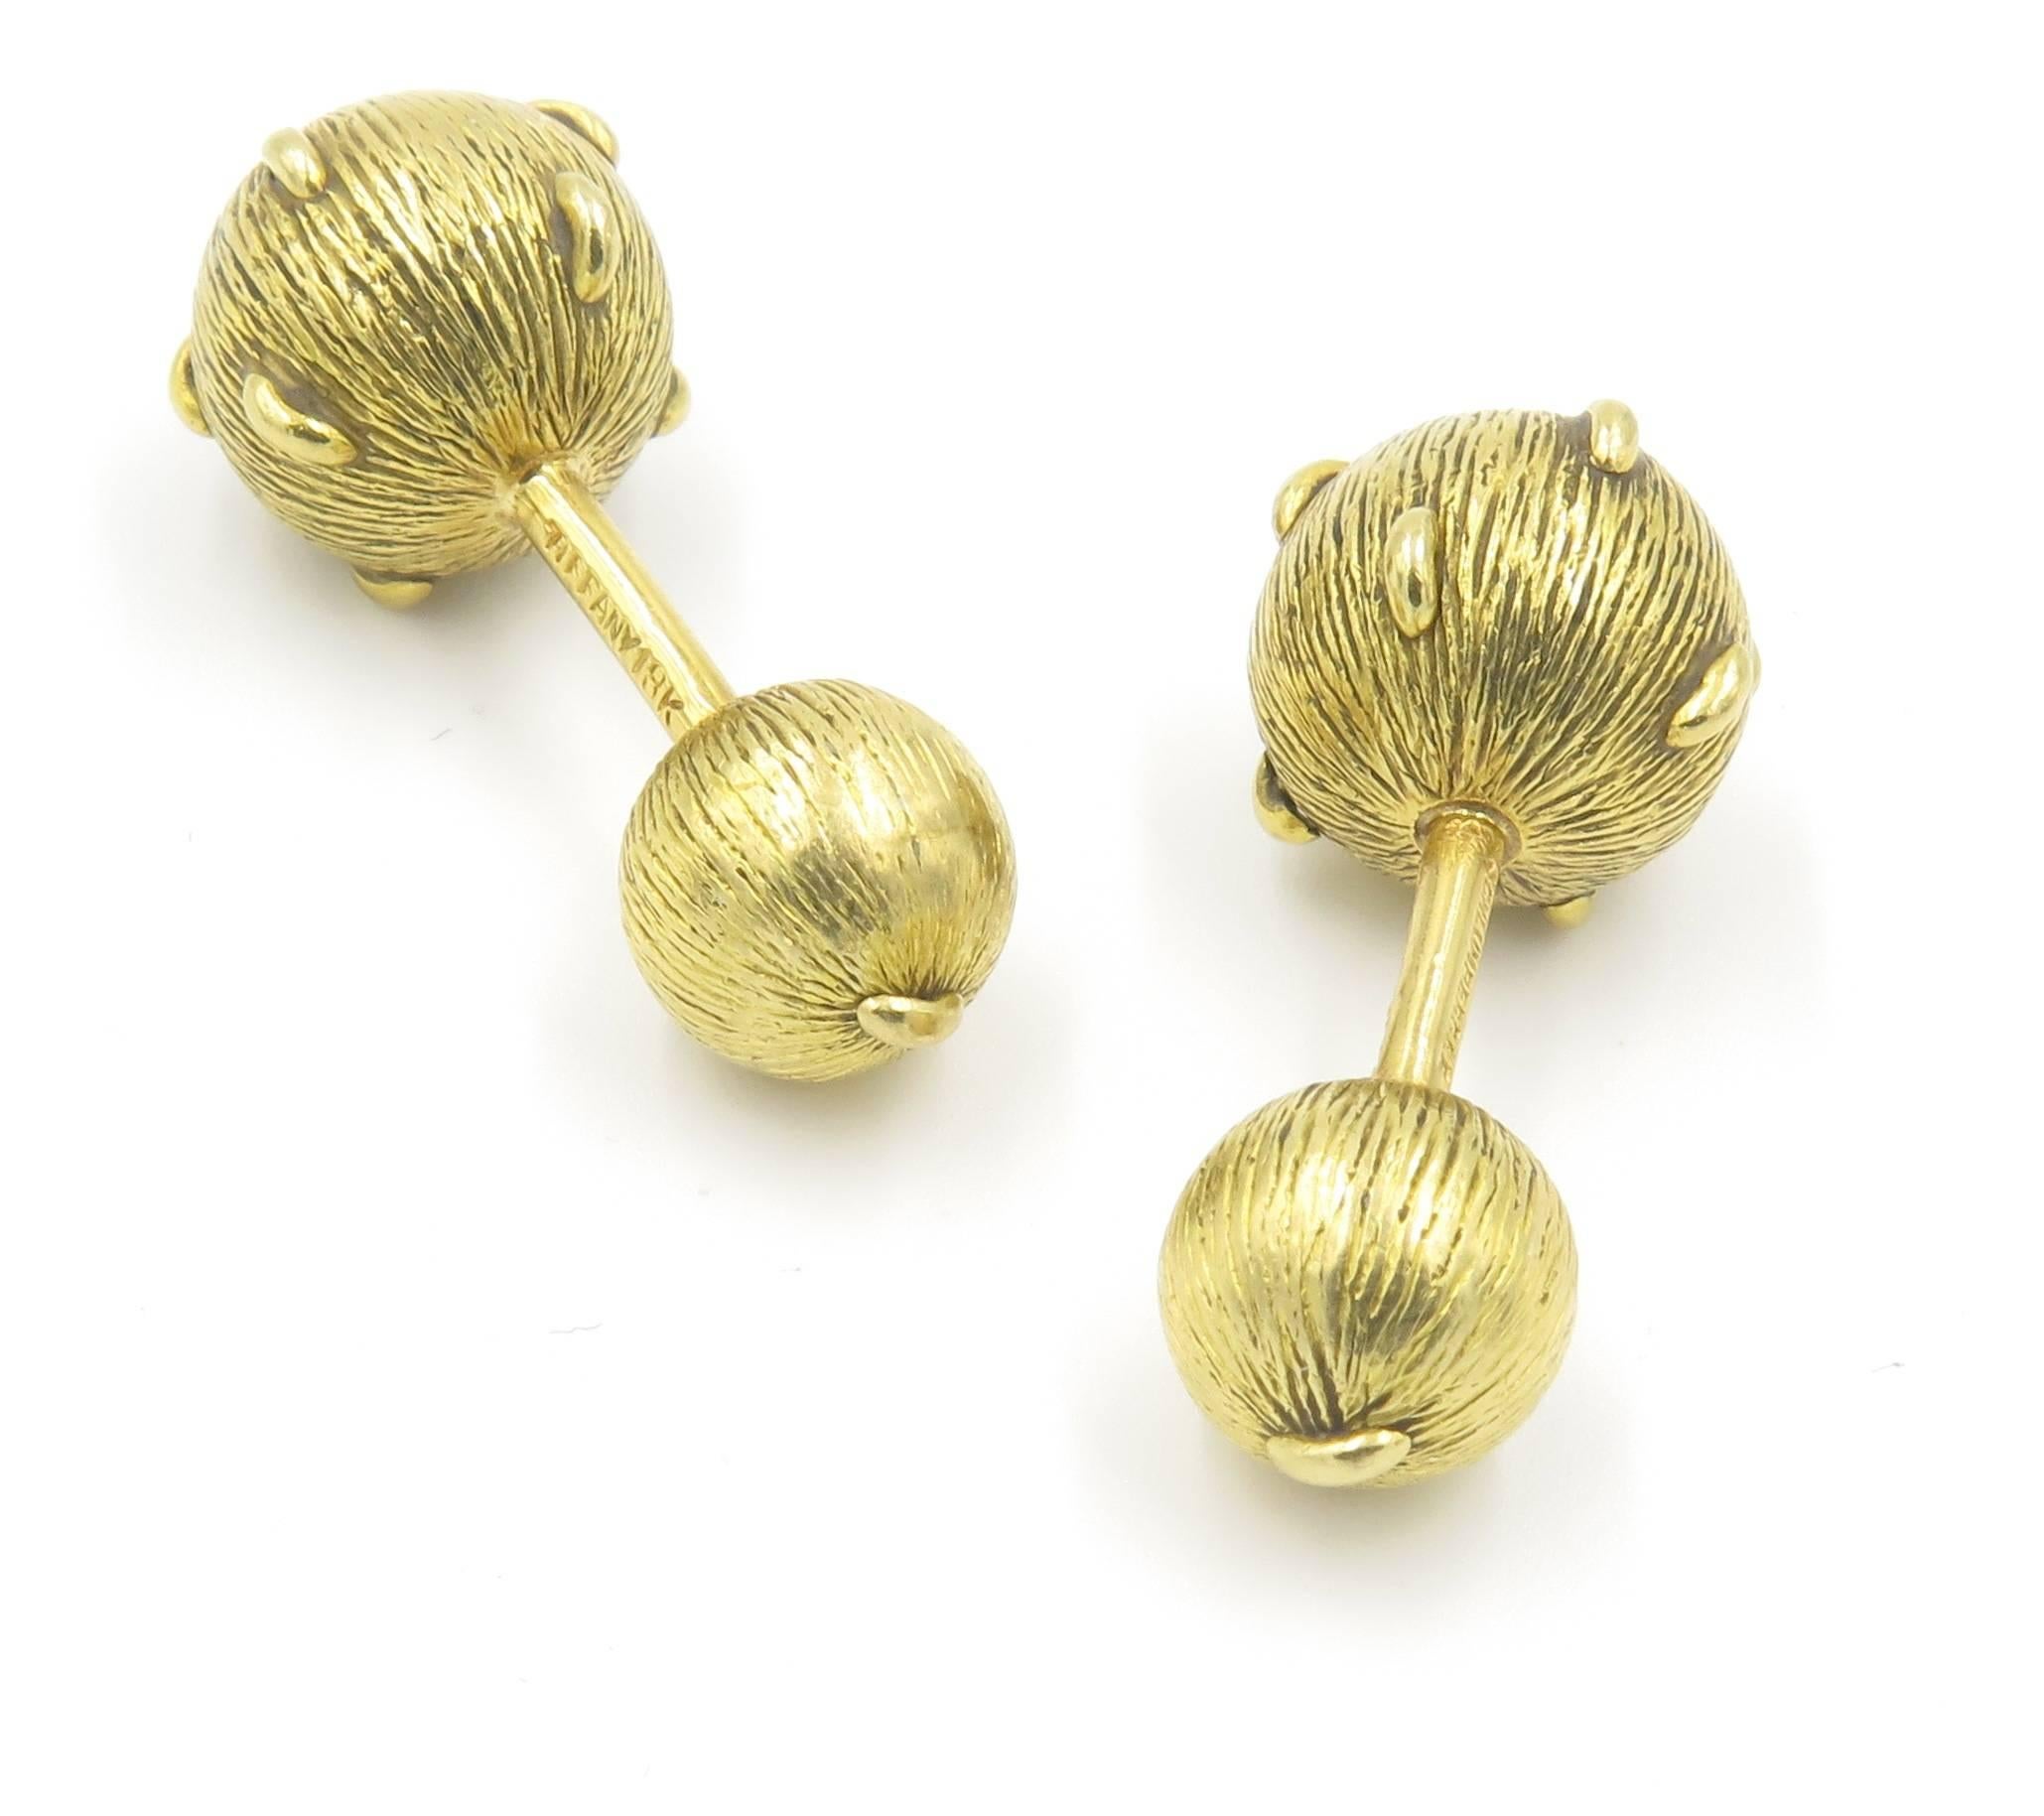 A pair of 18 karat yellow gold cufflinks, Tiffany & Co. Schlumberger. Circa 1990. Each double link set with a textured gold sphere. Diameter of largest link is 1/2 inch. Signed Tiffany, 18K. Schlumberger. Gross weight is approximately 14.4 grams.